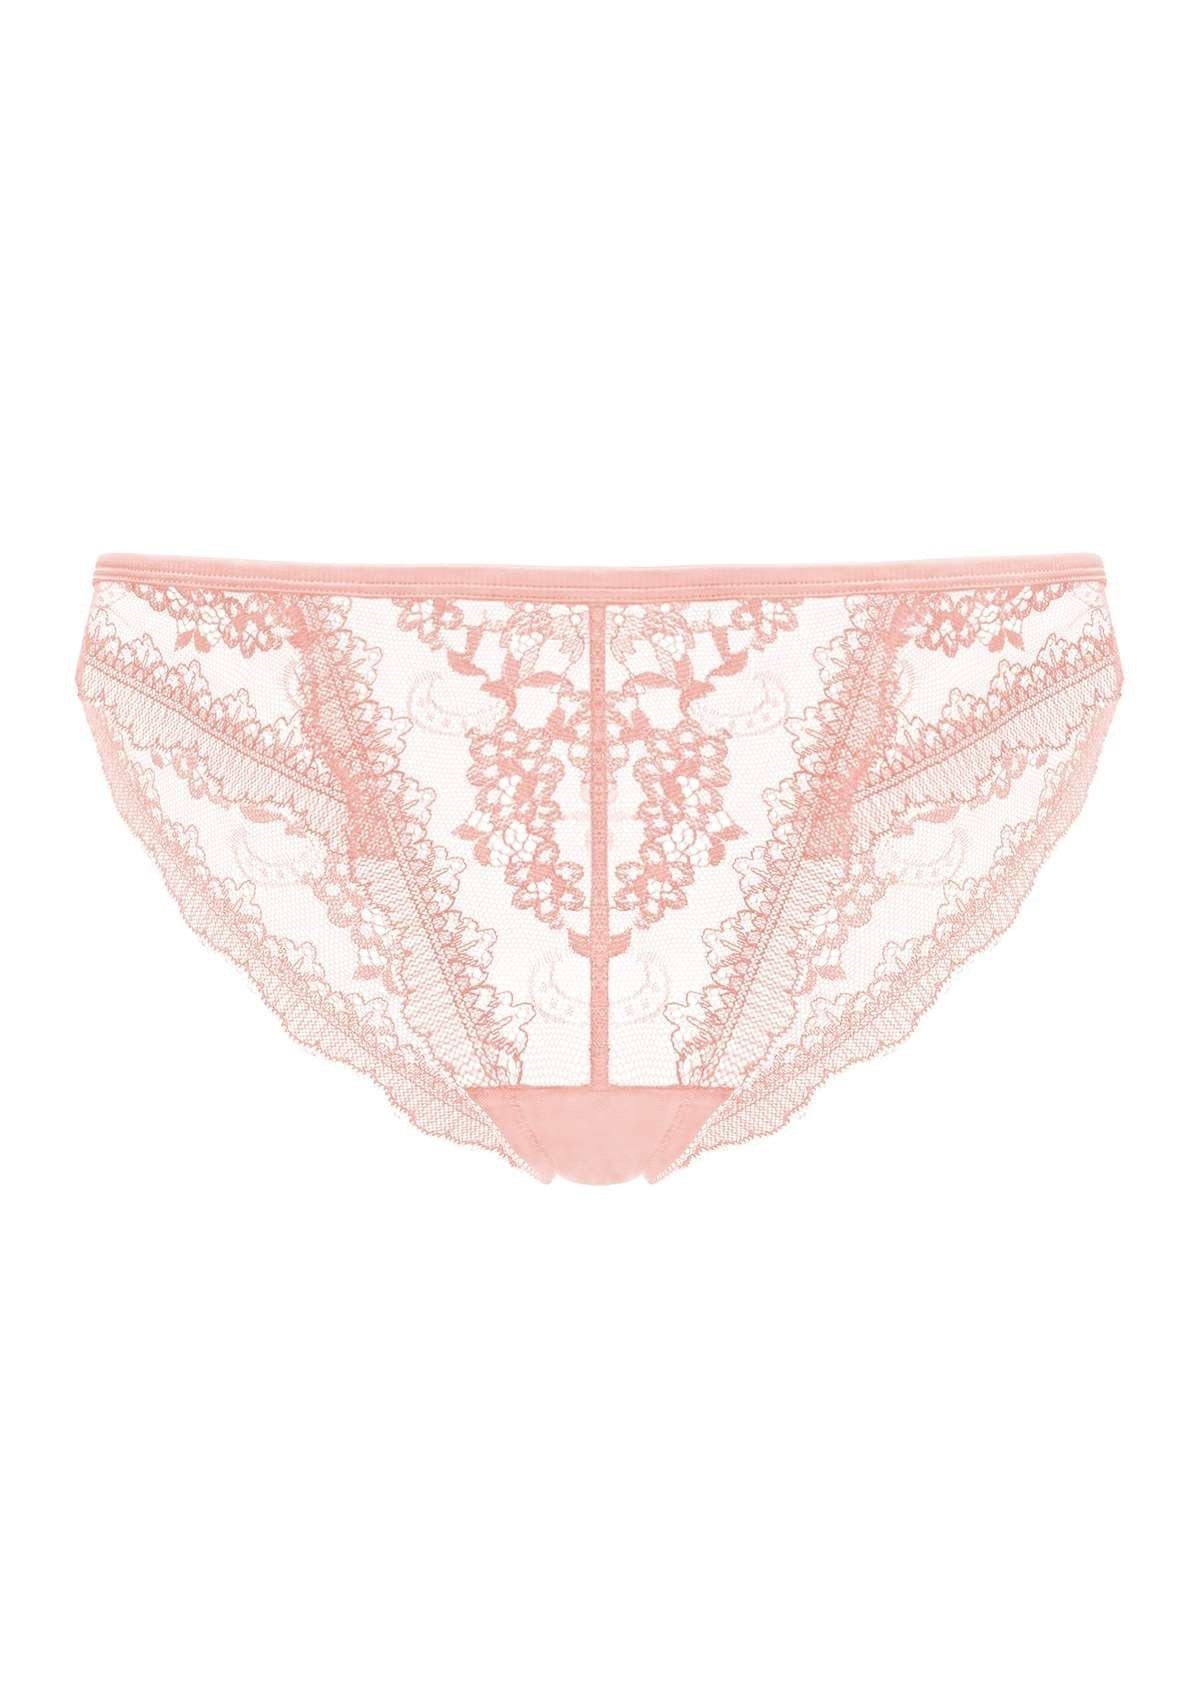 HSIA Floral Bridal Lace Back Cheeky Delicate Underwear  - Pink / XL